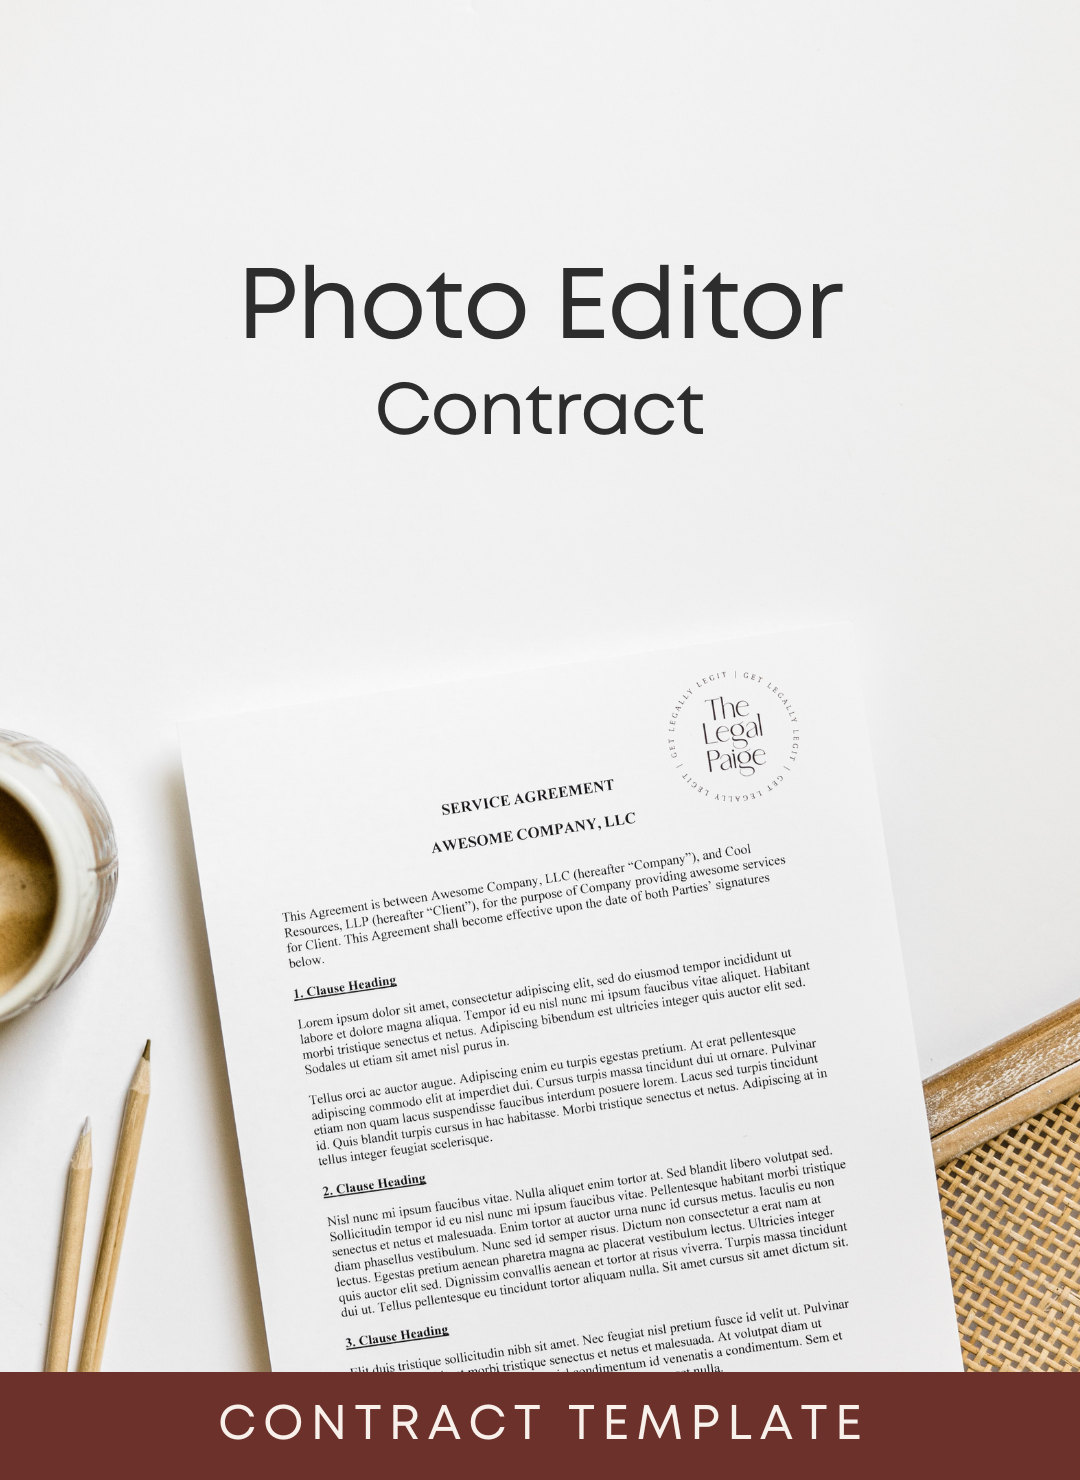 Photo Editor Template Contract The Legal Paige®